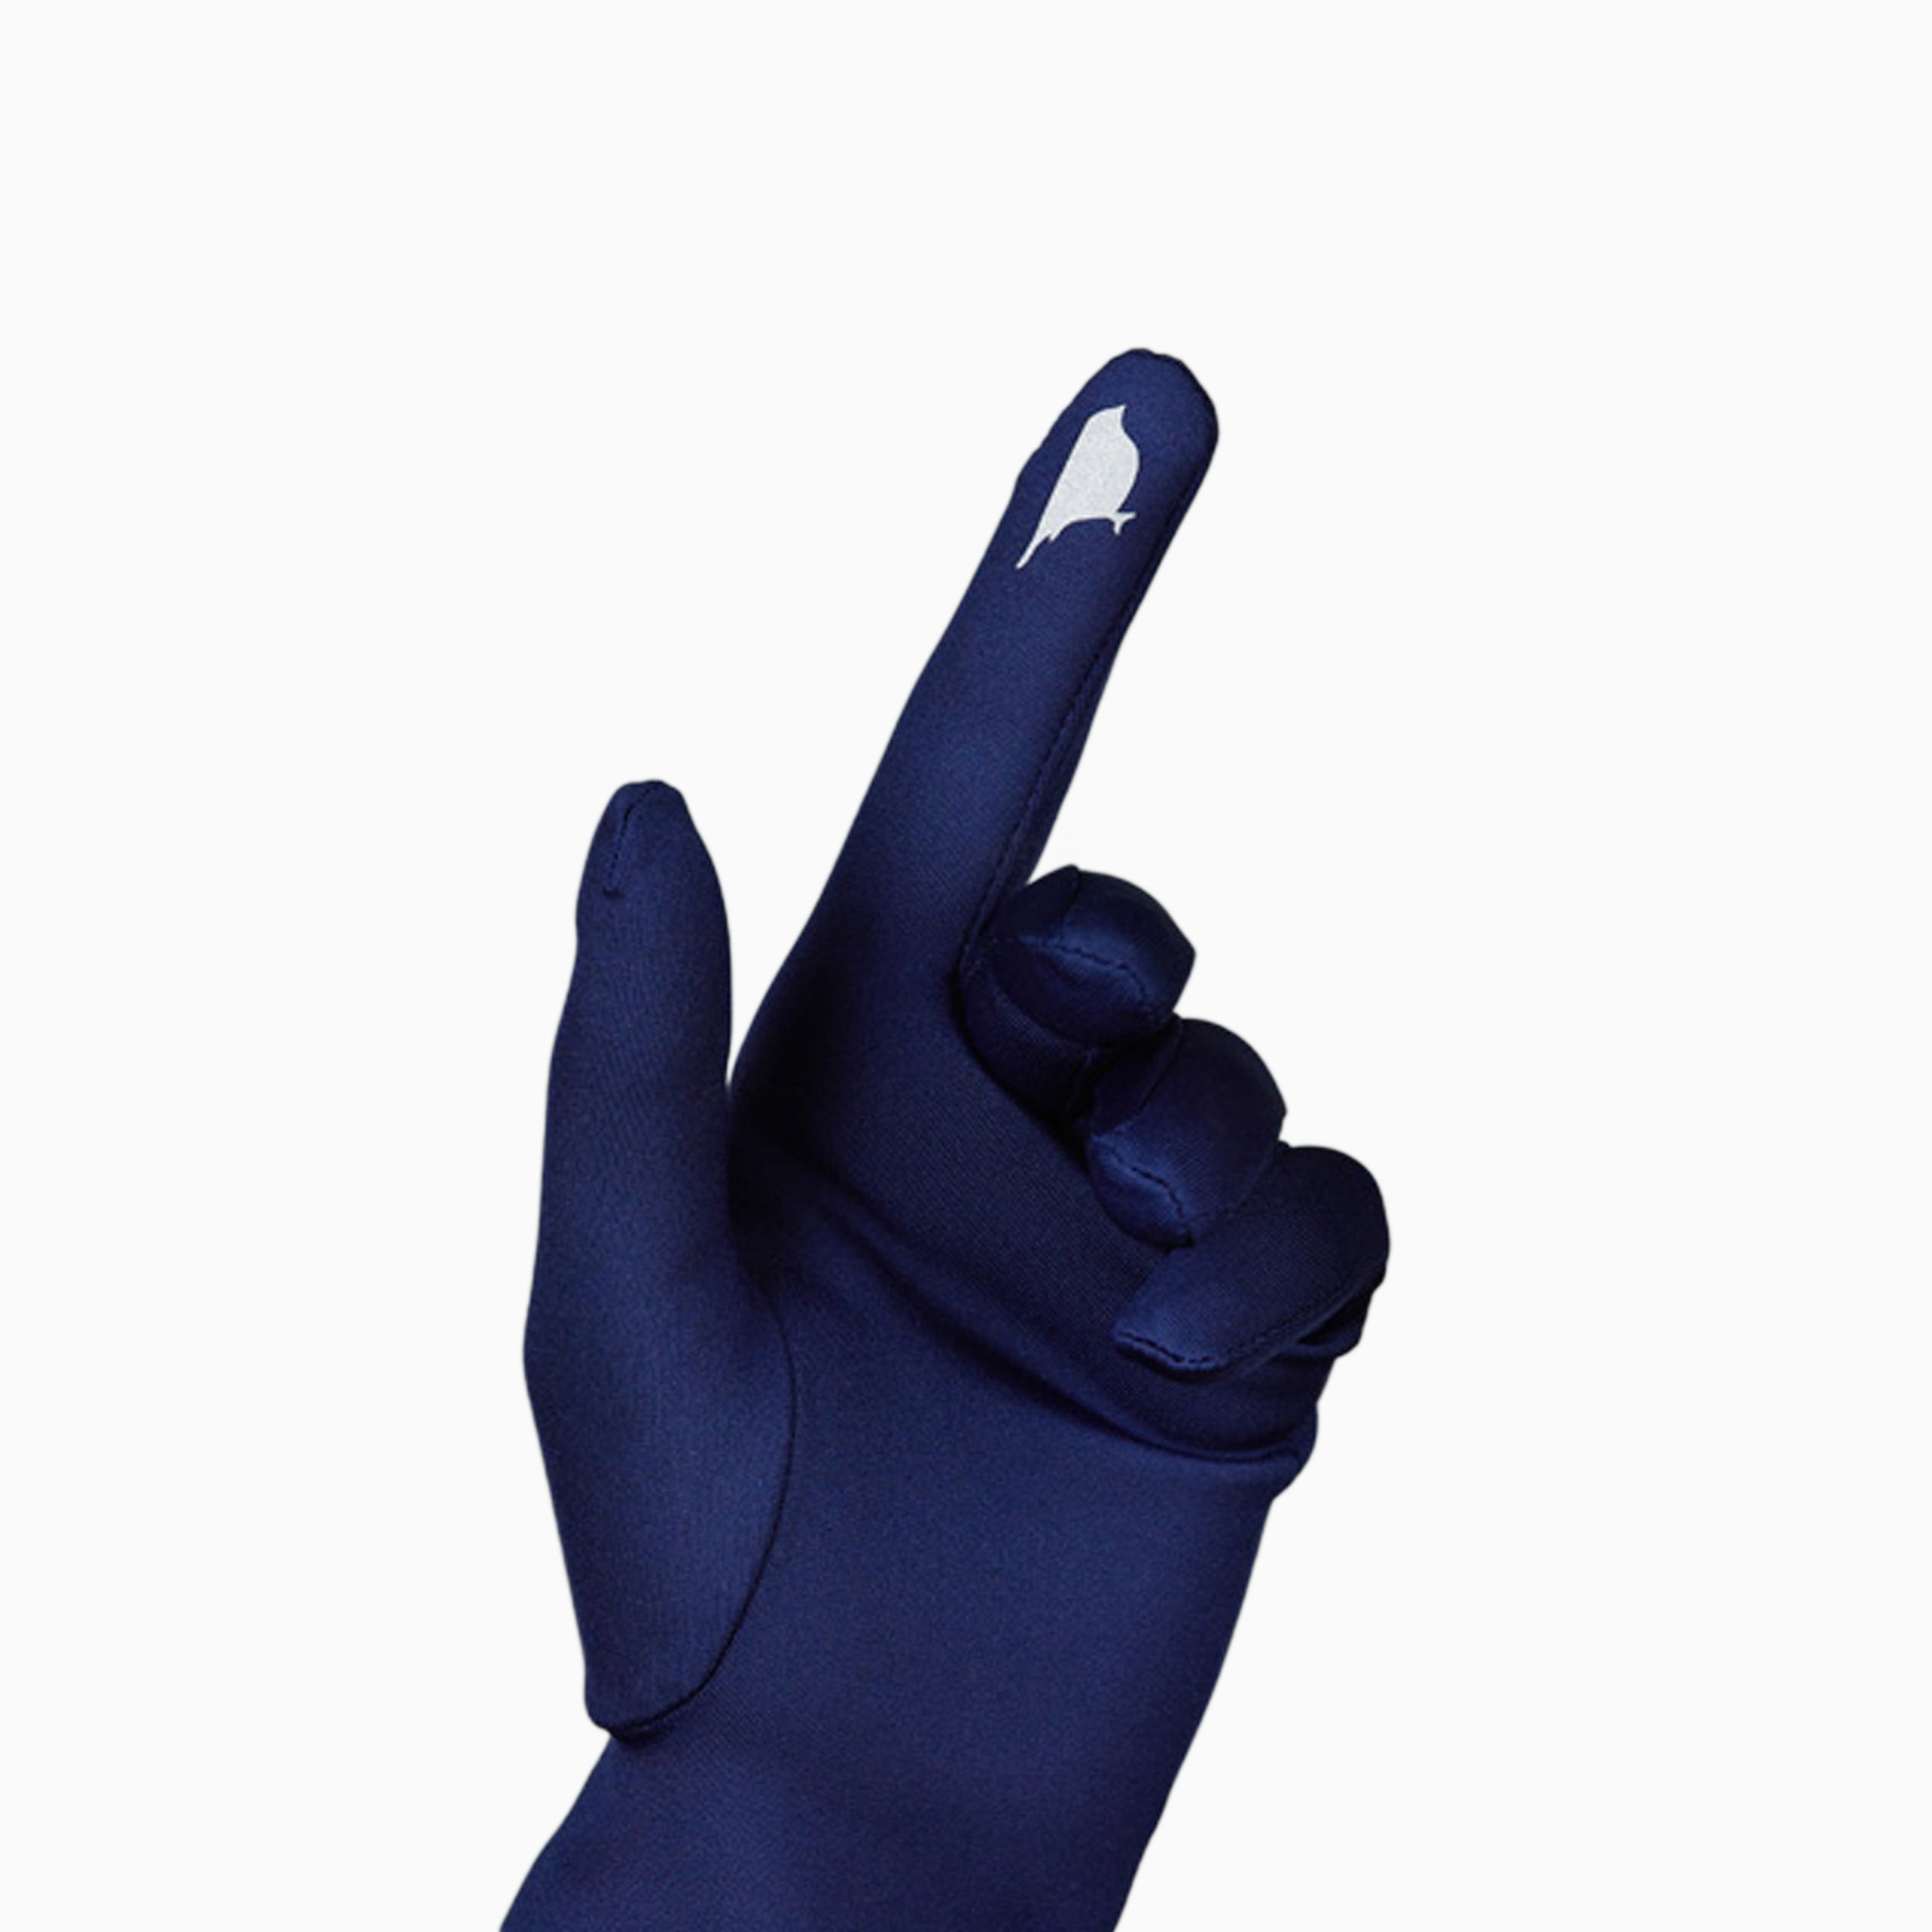 Blue women&#39;s glove against white background showing technology friendly index finger.